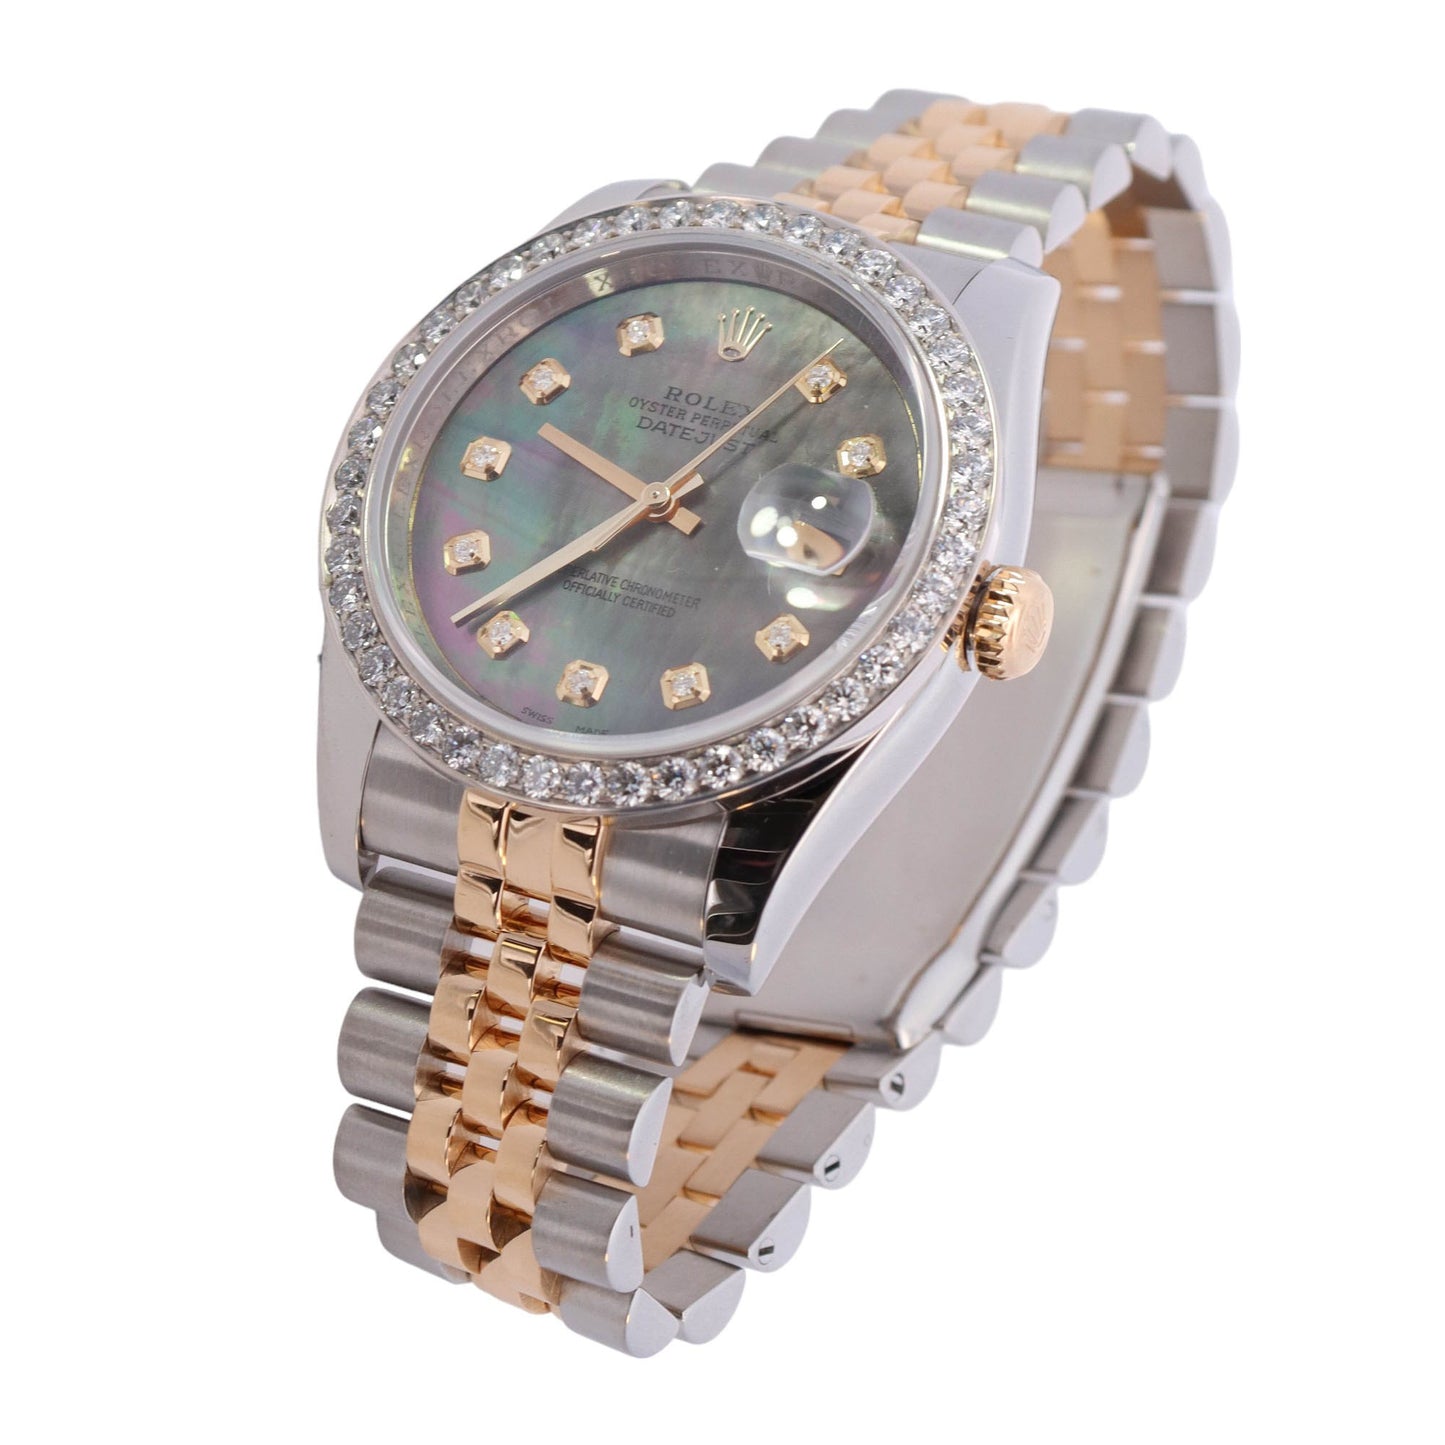 Rolex Datejust Two Tone Stainless Steel & Yellow Gold 36mm Custom Dark MOP Diamond Dial Watch Reference #: 116233